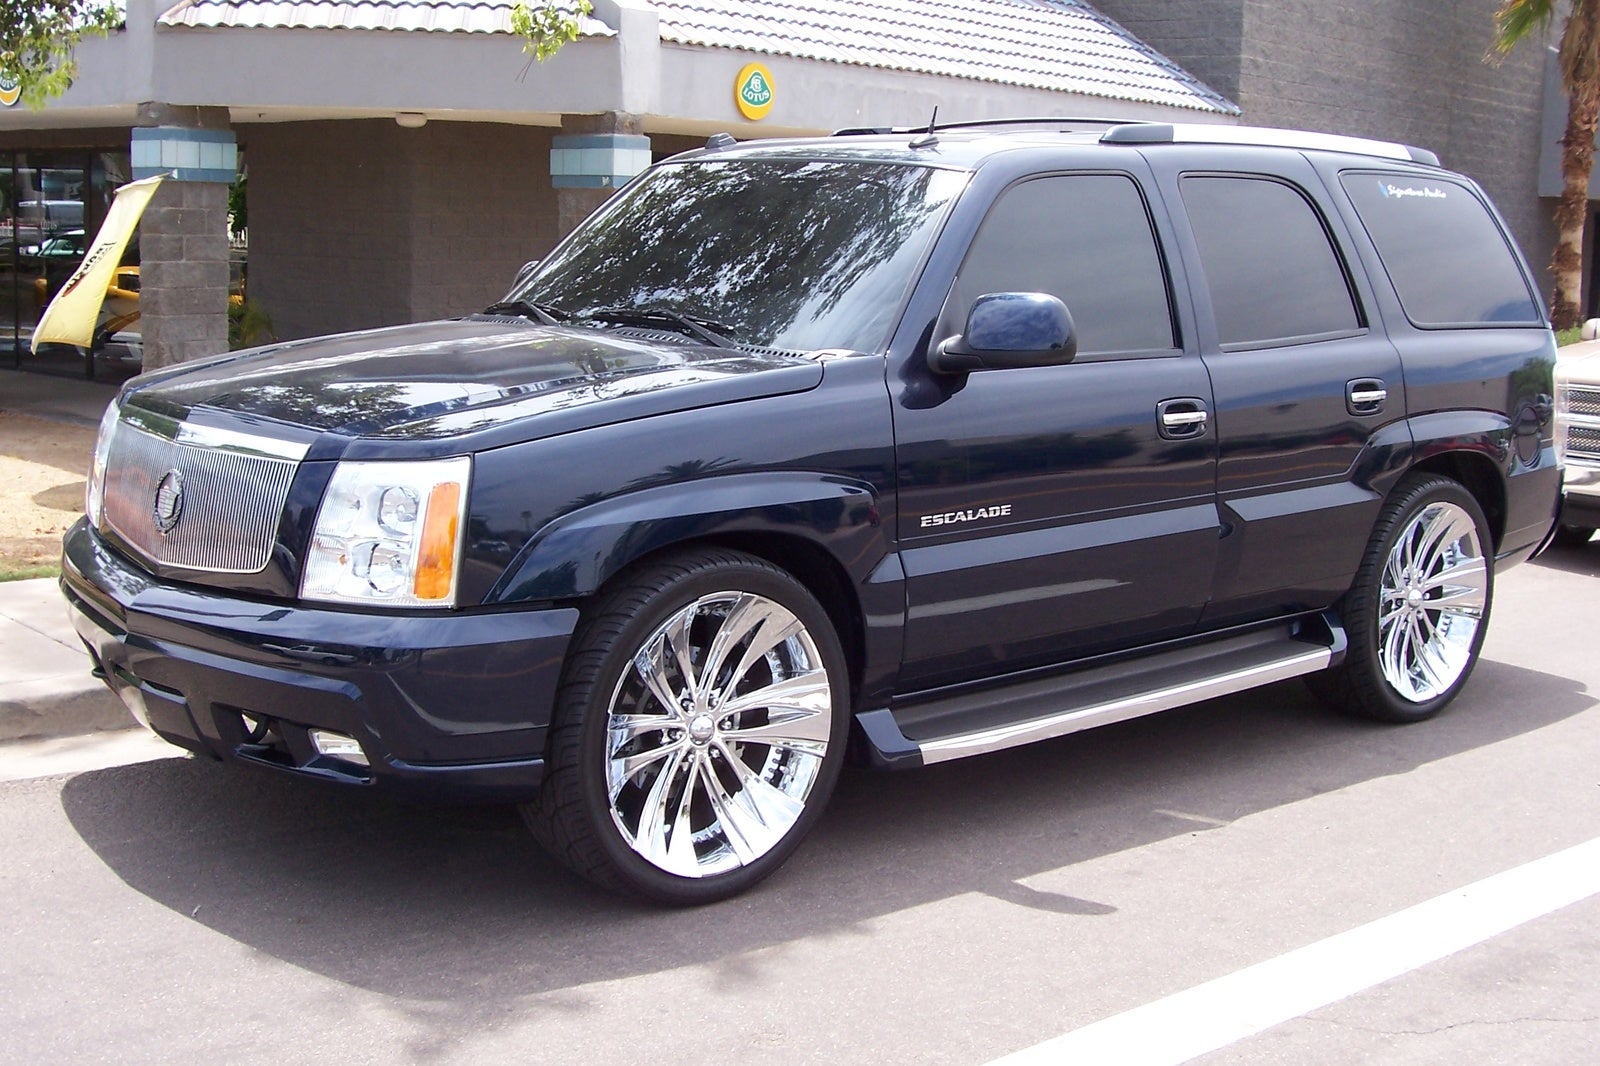  Cadillac  on 2005 Cadillac Escalade   Pictures   Picture Of 2005 Cadillac Escal